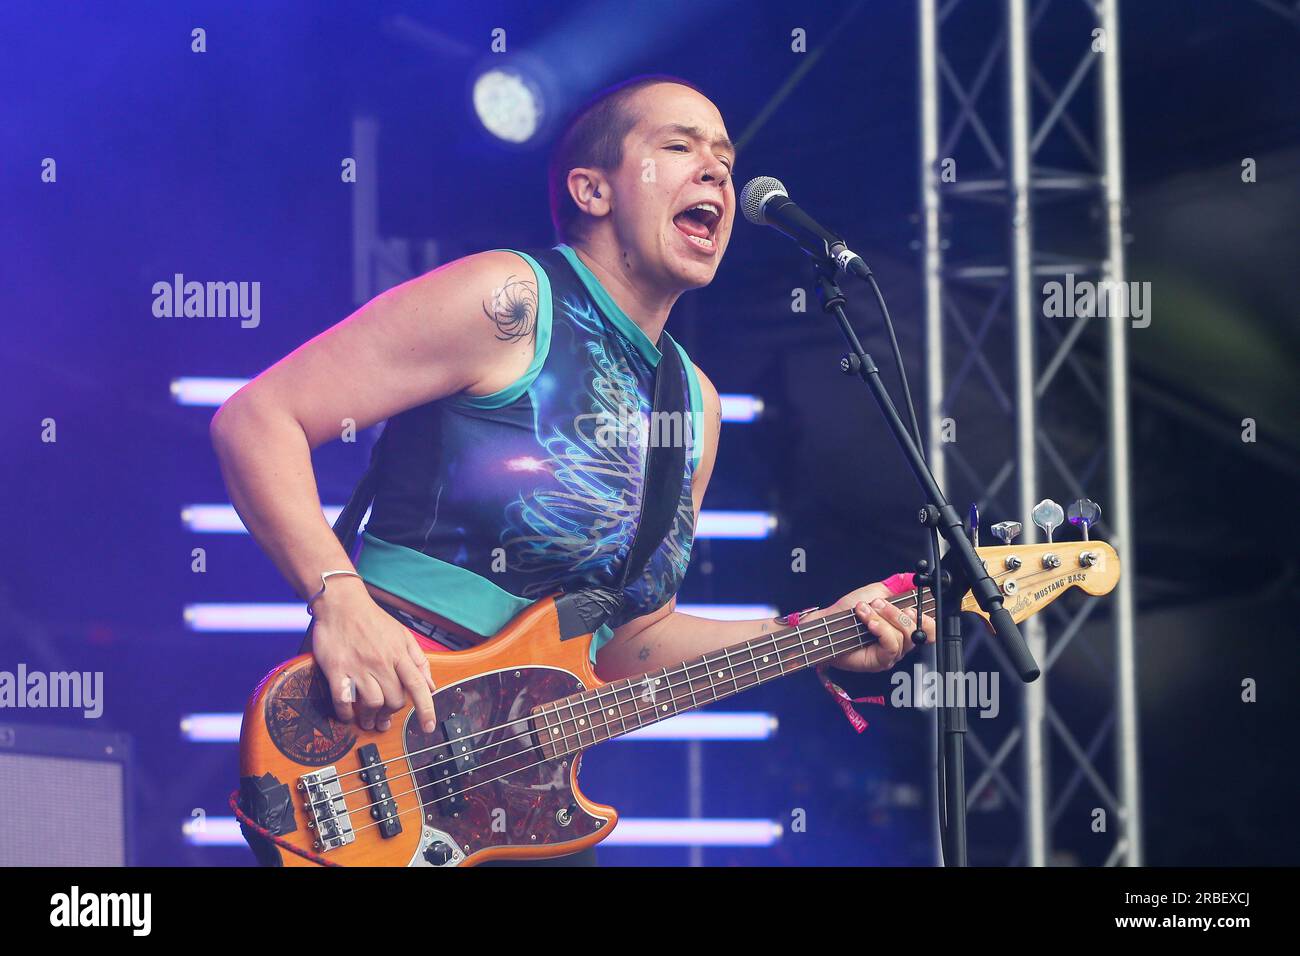 Female punk rocker - hi-res photography images - stock Page 12 and Alamy